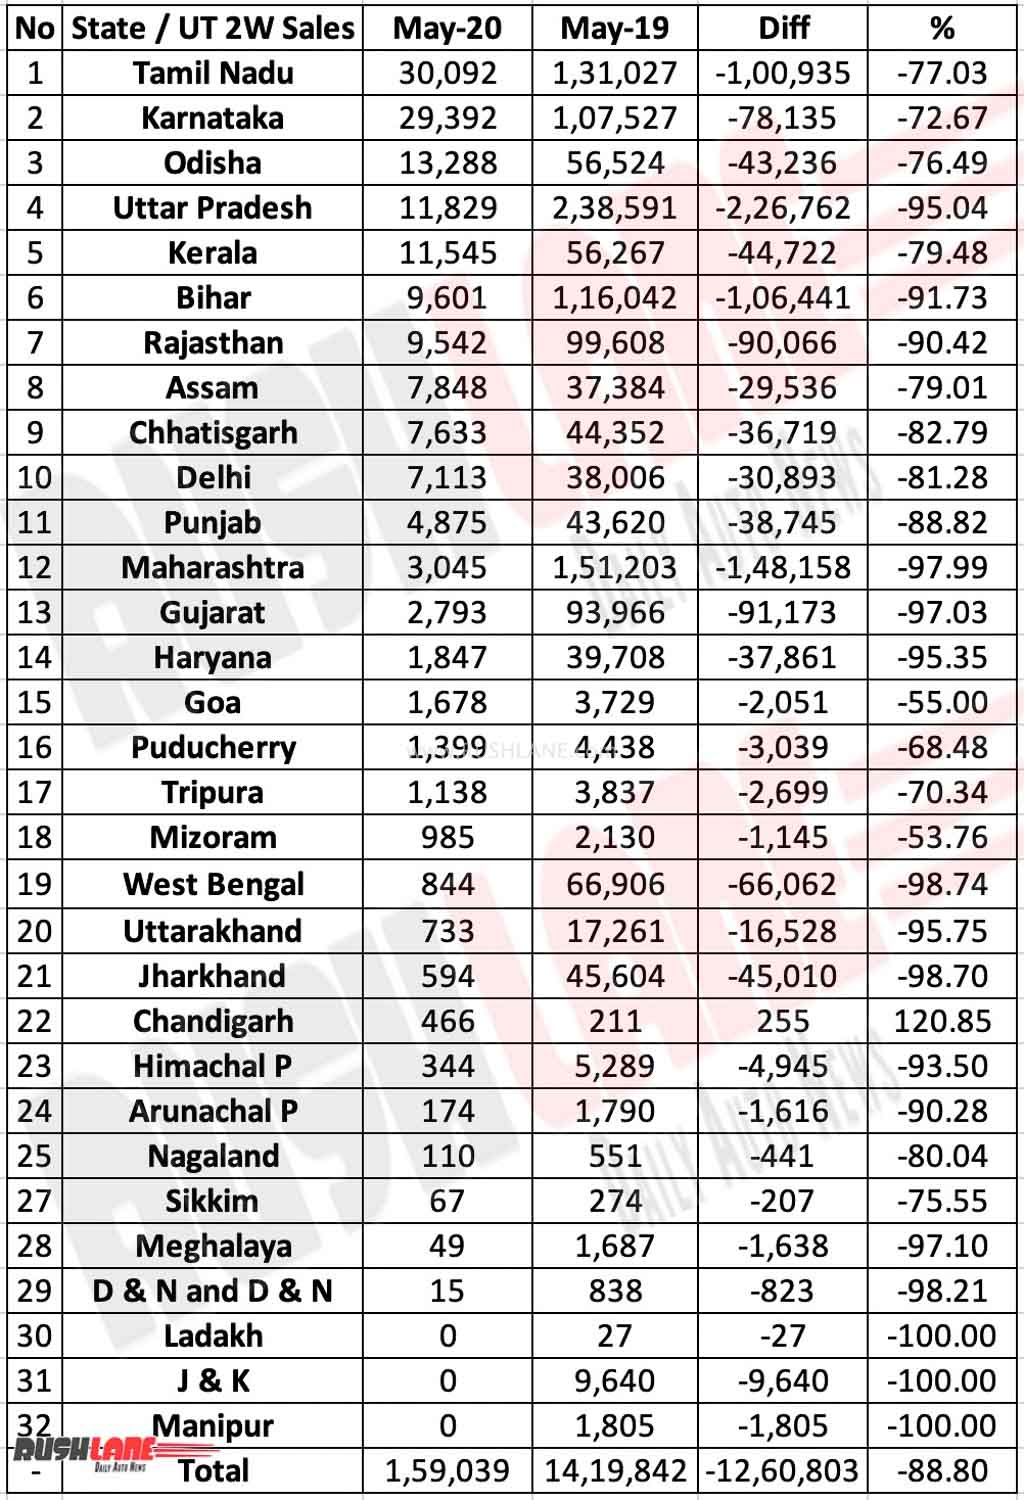 State-wise May 2020 Two Wheeler Sales